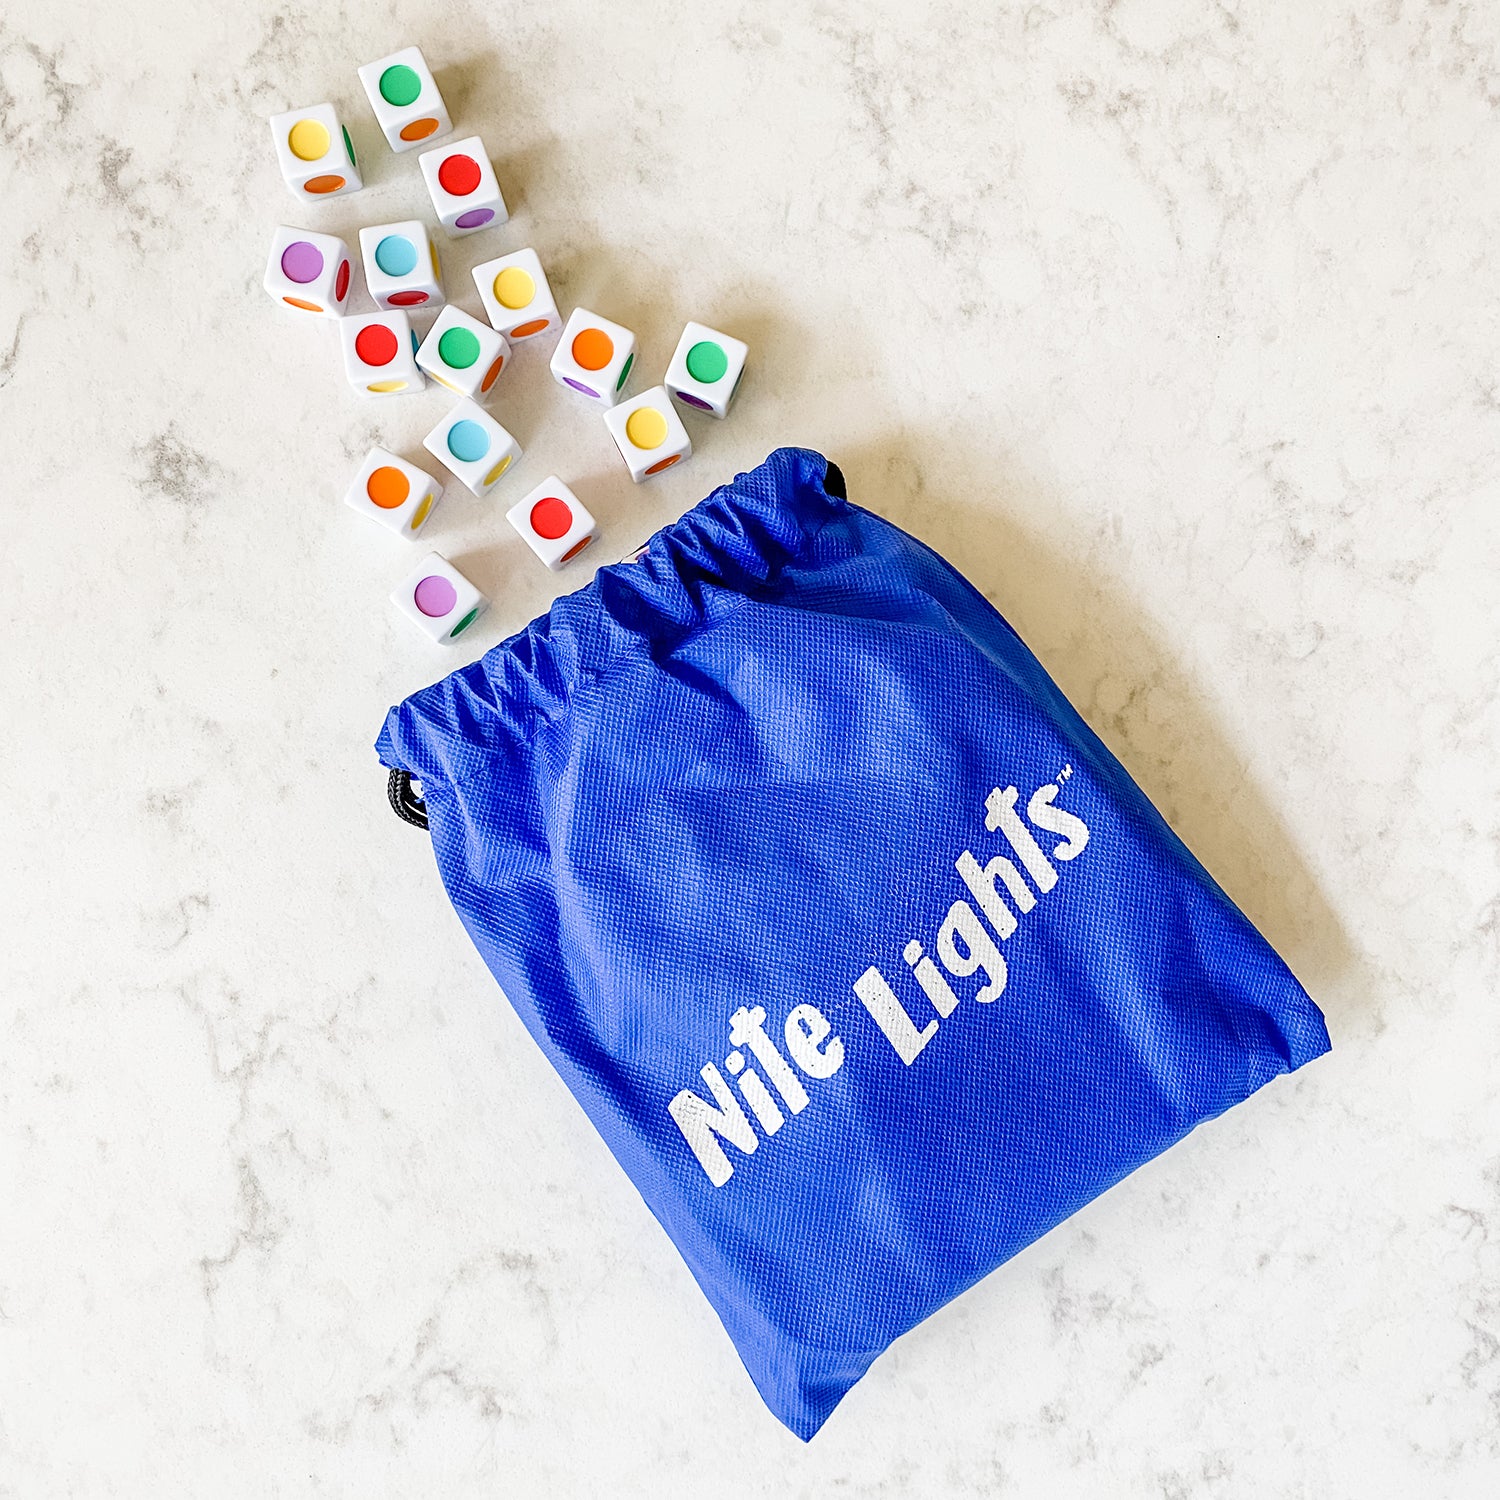 Nite Lights by SimplyFun is a fun strategy game for 2-4 players aged 10 and up.